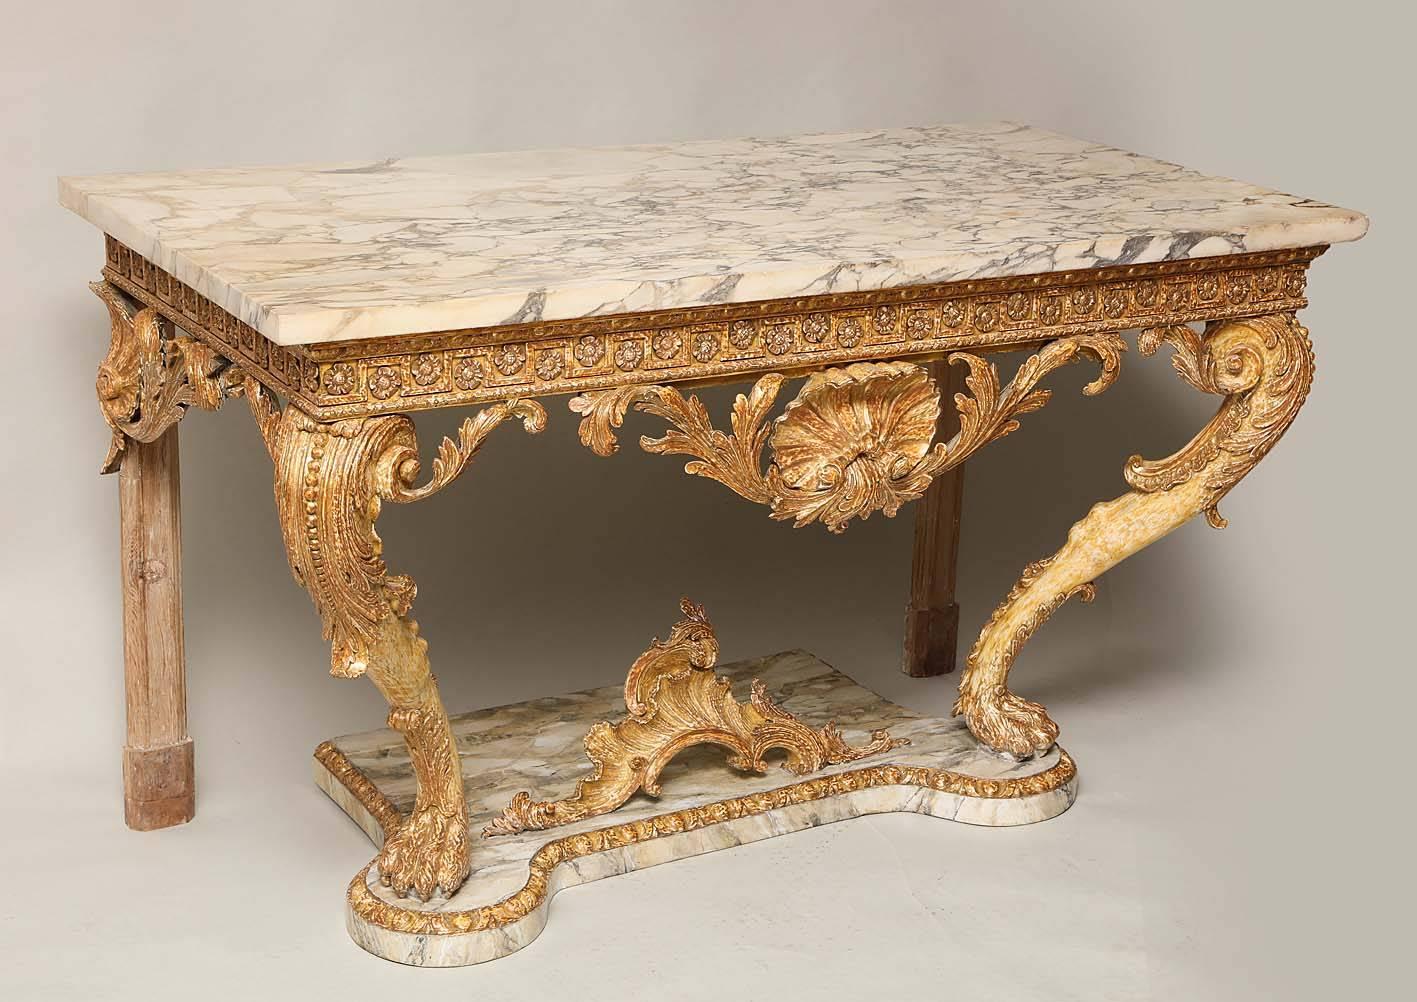 Very fine and important George II period console table, circa 1740, the Breccia Capraia marble top over egg and dart carved apron with rosettes in a Greek key border over shell and scroll carved frieze standing on muscular lion legs having beaded